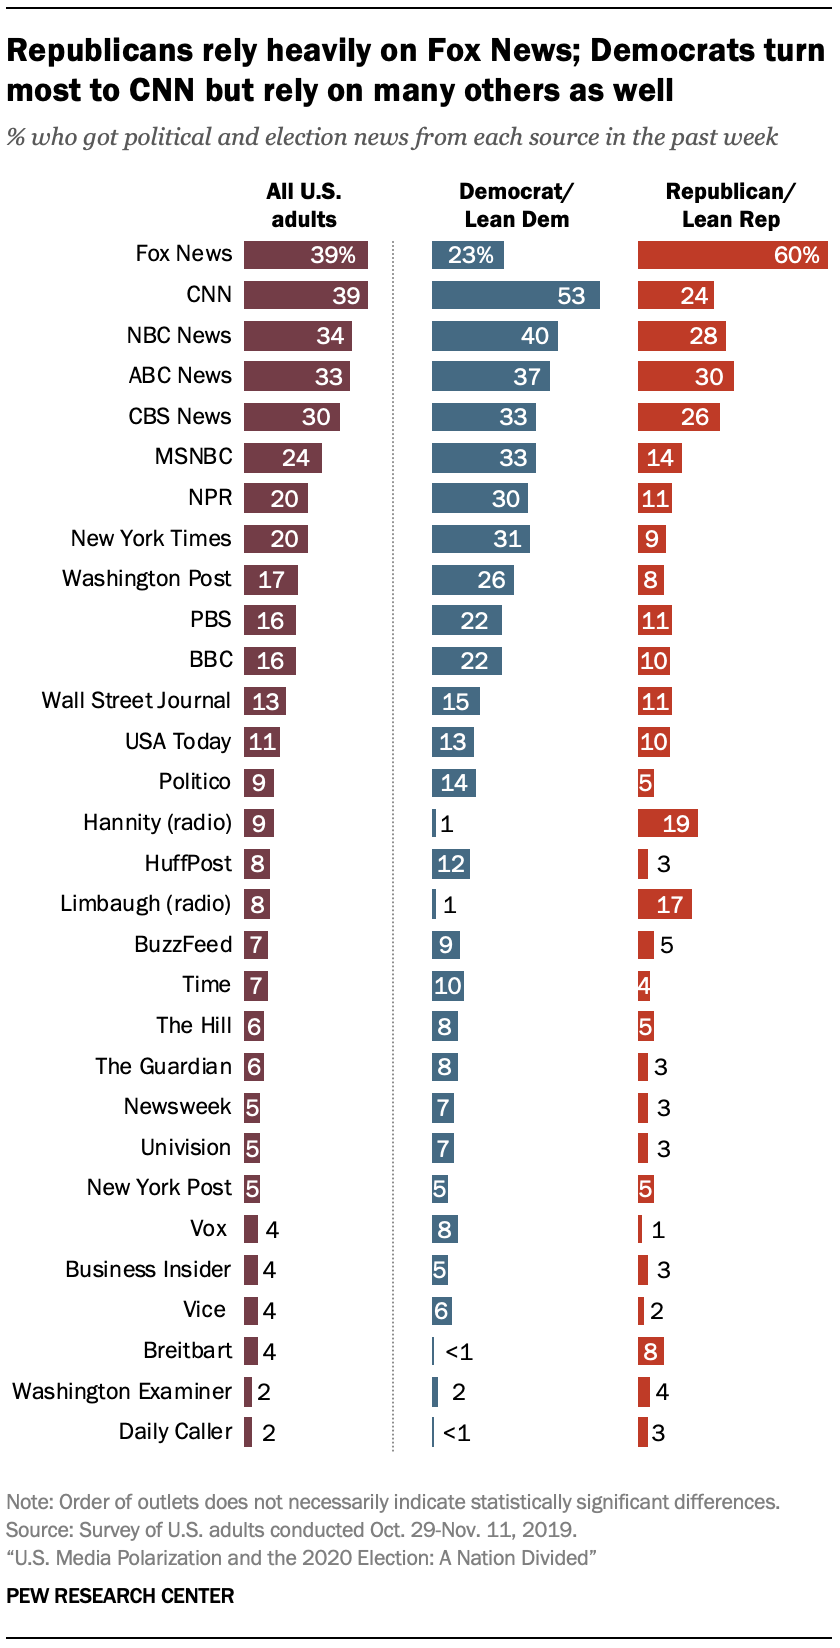 Republicans rely heavily on Fox News; Democrats turn most to CNN but rely on many others as well